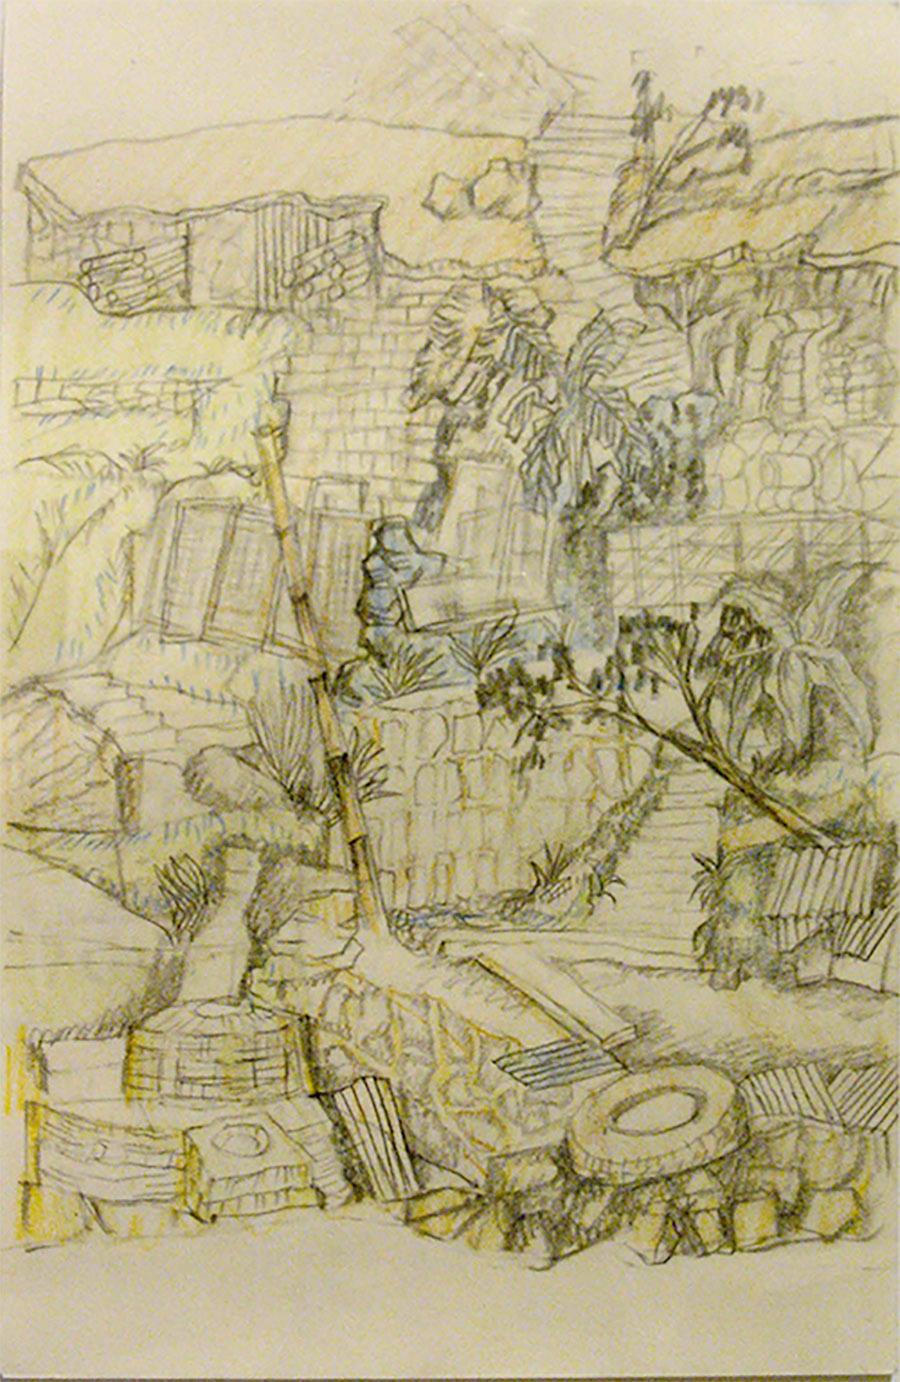 Untitled Empty City Study, 2003, by Yun-Fei Ji
Graphite and Colored Pencil on Paper